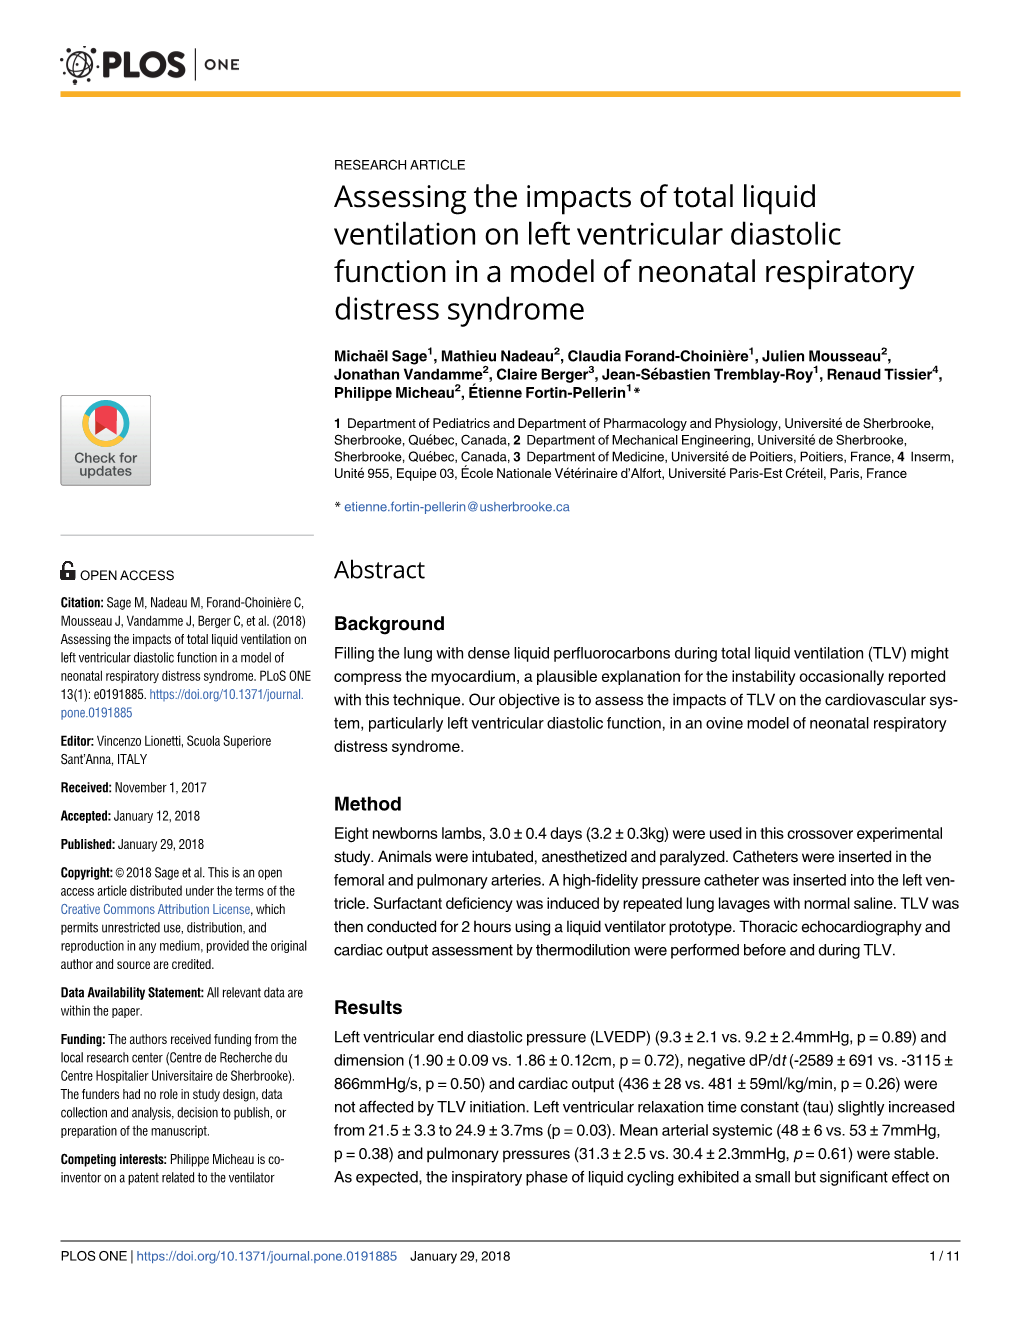 Assessing the Impacts of Total Liquid Ventilation on Left Ventricular Diastolic Function in a Model of Neonatal Respiratory Distress Syndrome